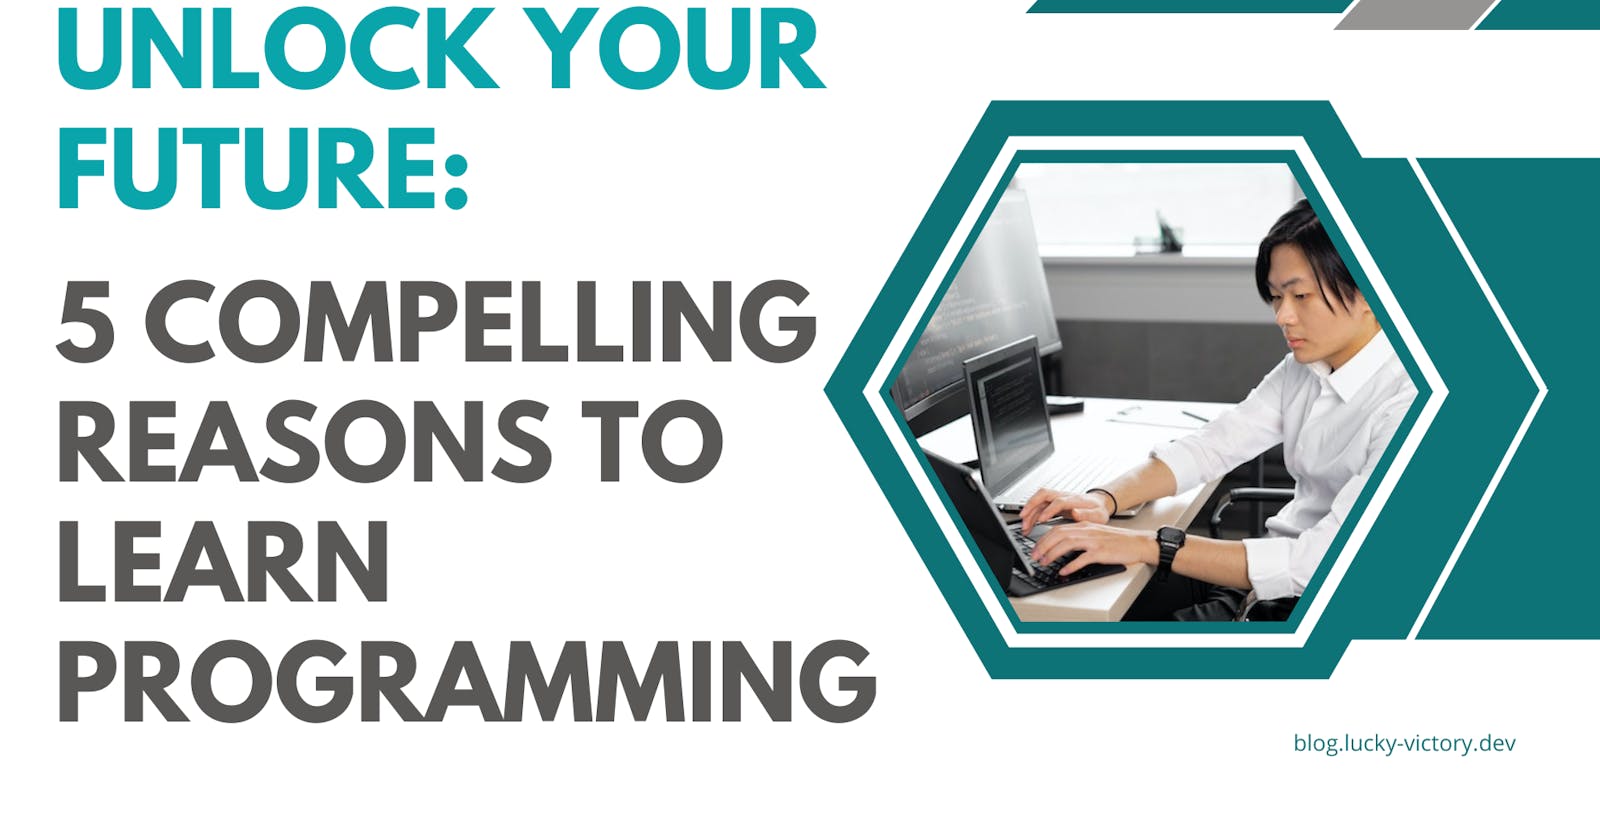 Unlock Your Future: 5 Compelling Reasons to Learn Programming